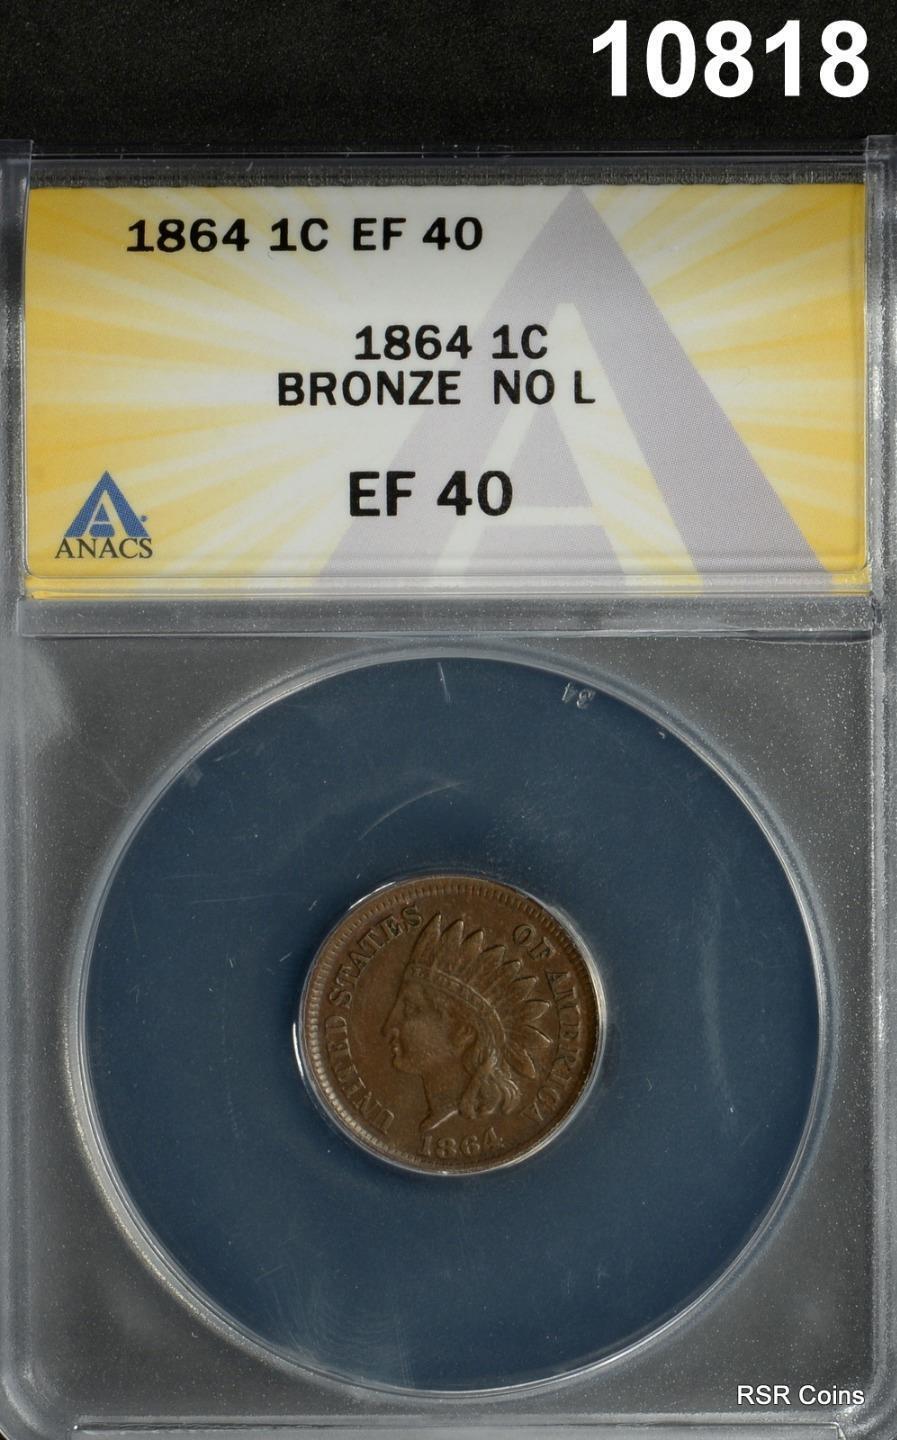 1864 INDIAN HEAD CENT ANACS CERTIFIED EF40 BRONZE NO L #10818